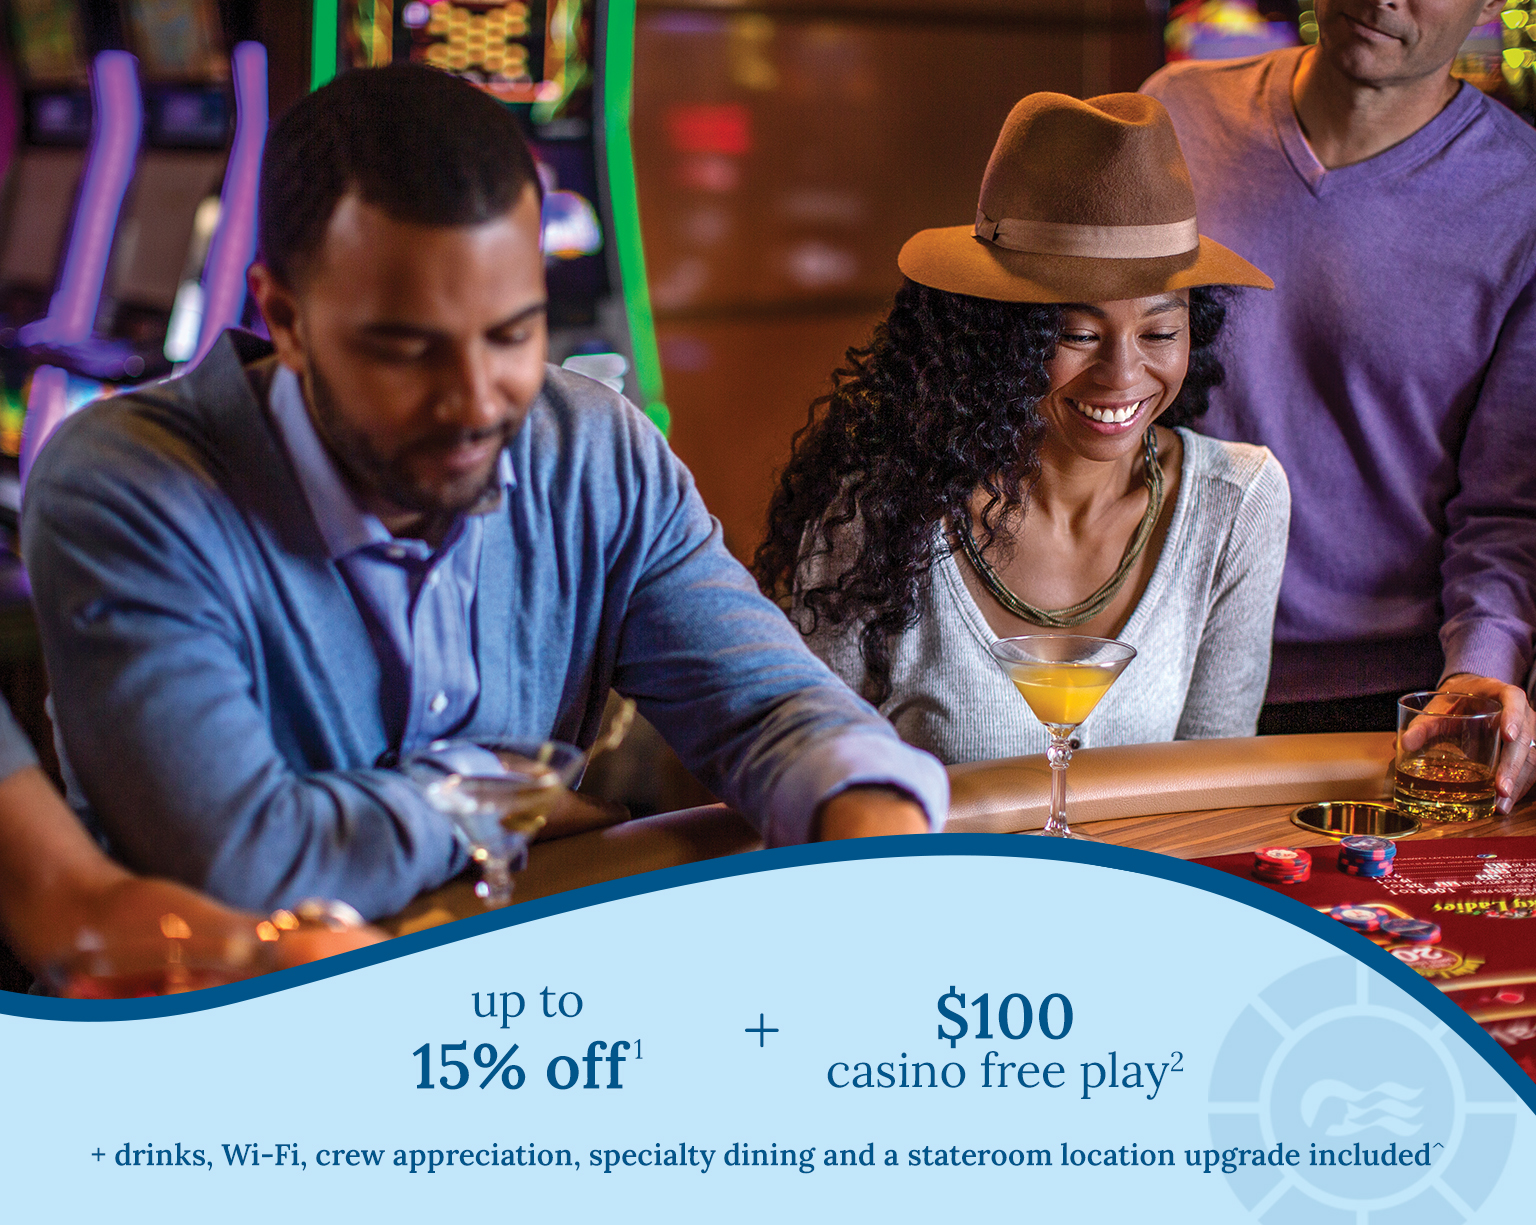 up to 15% off1 + $100 casino free play2